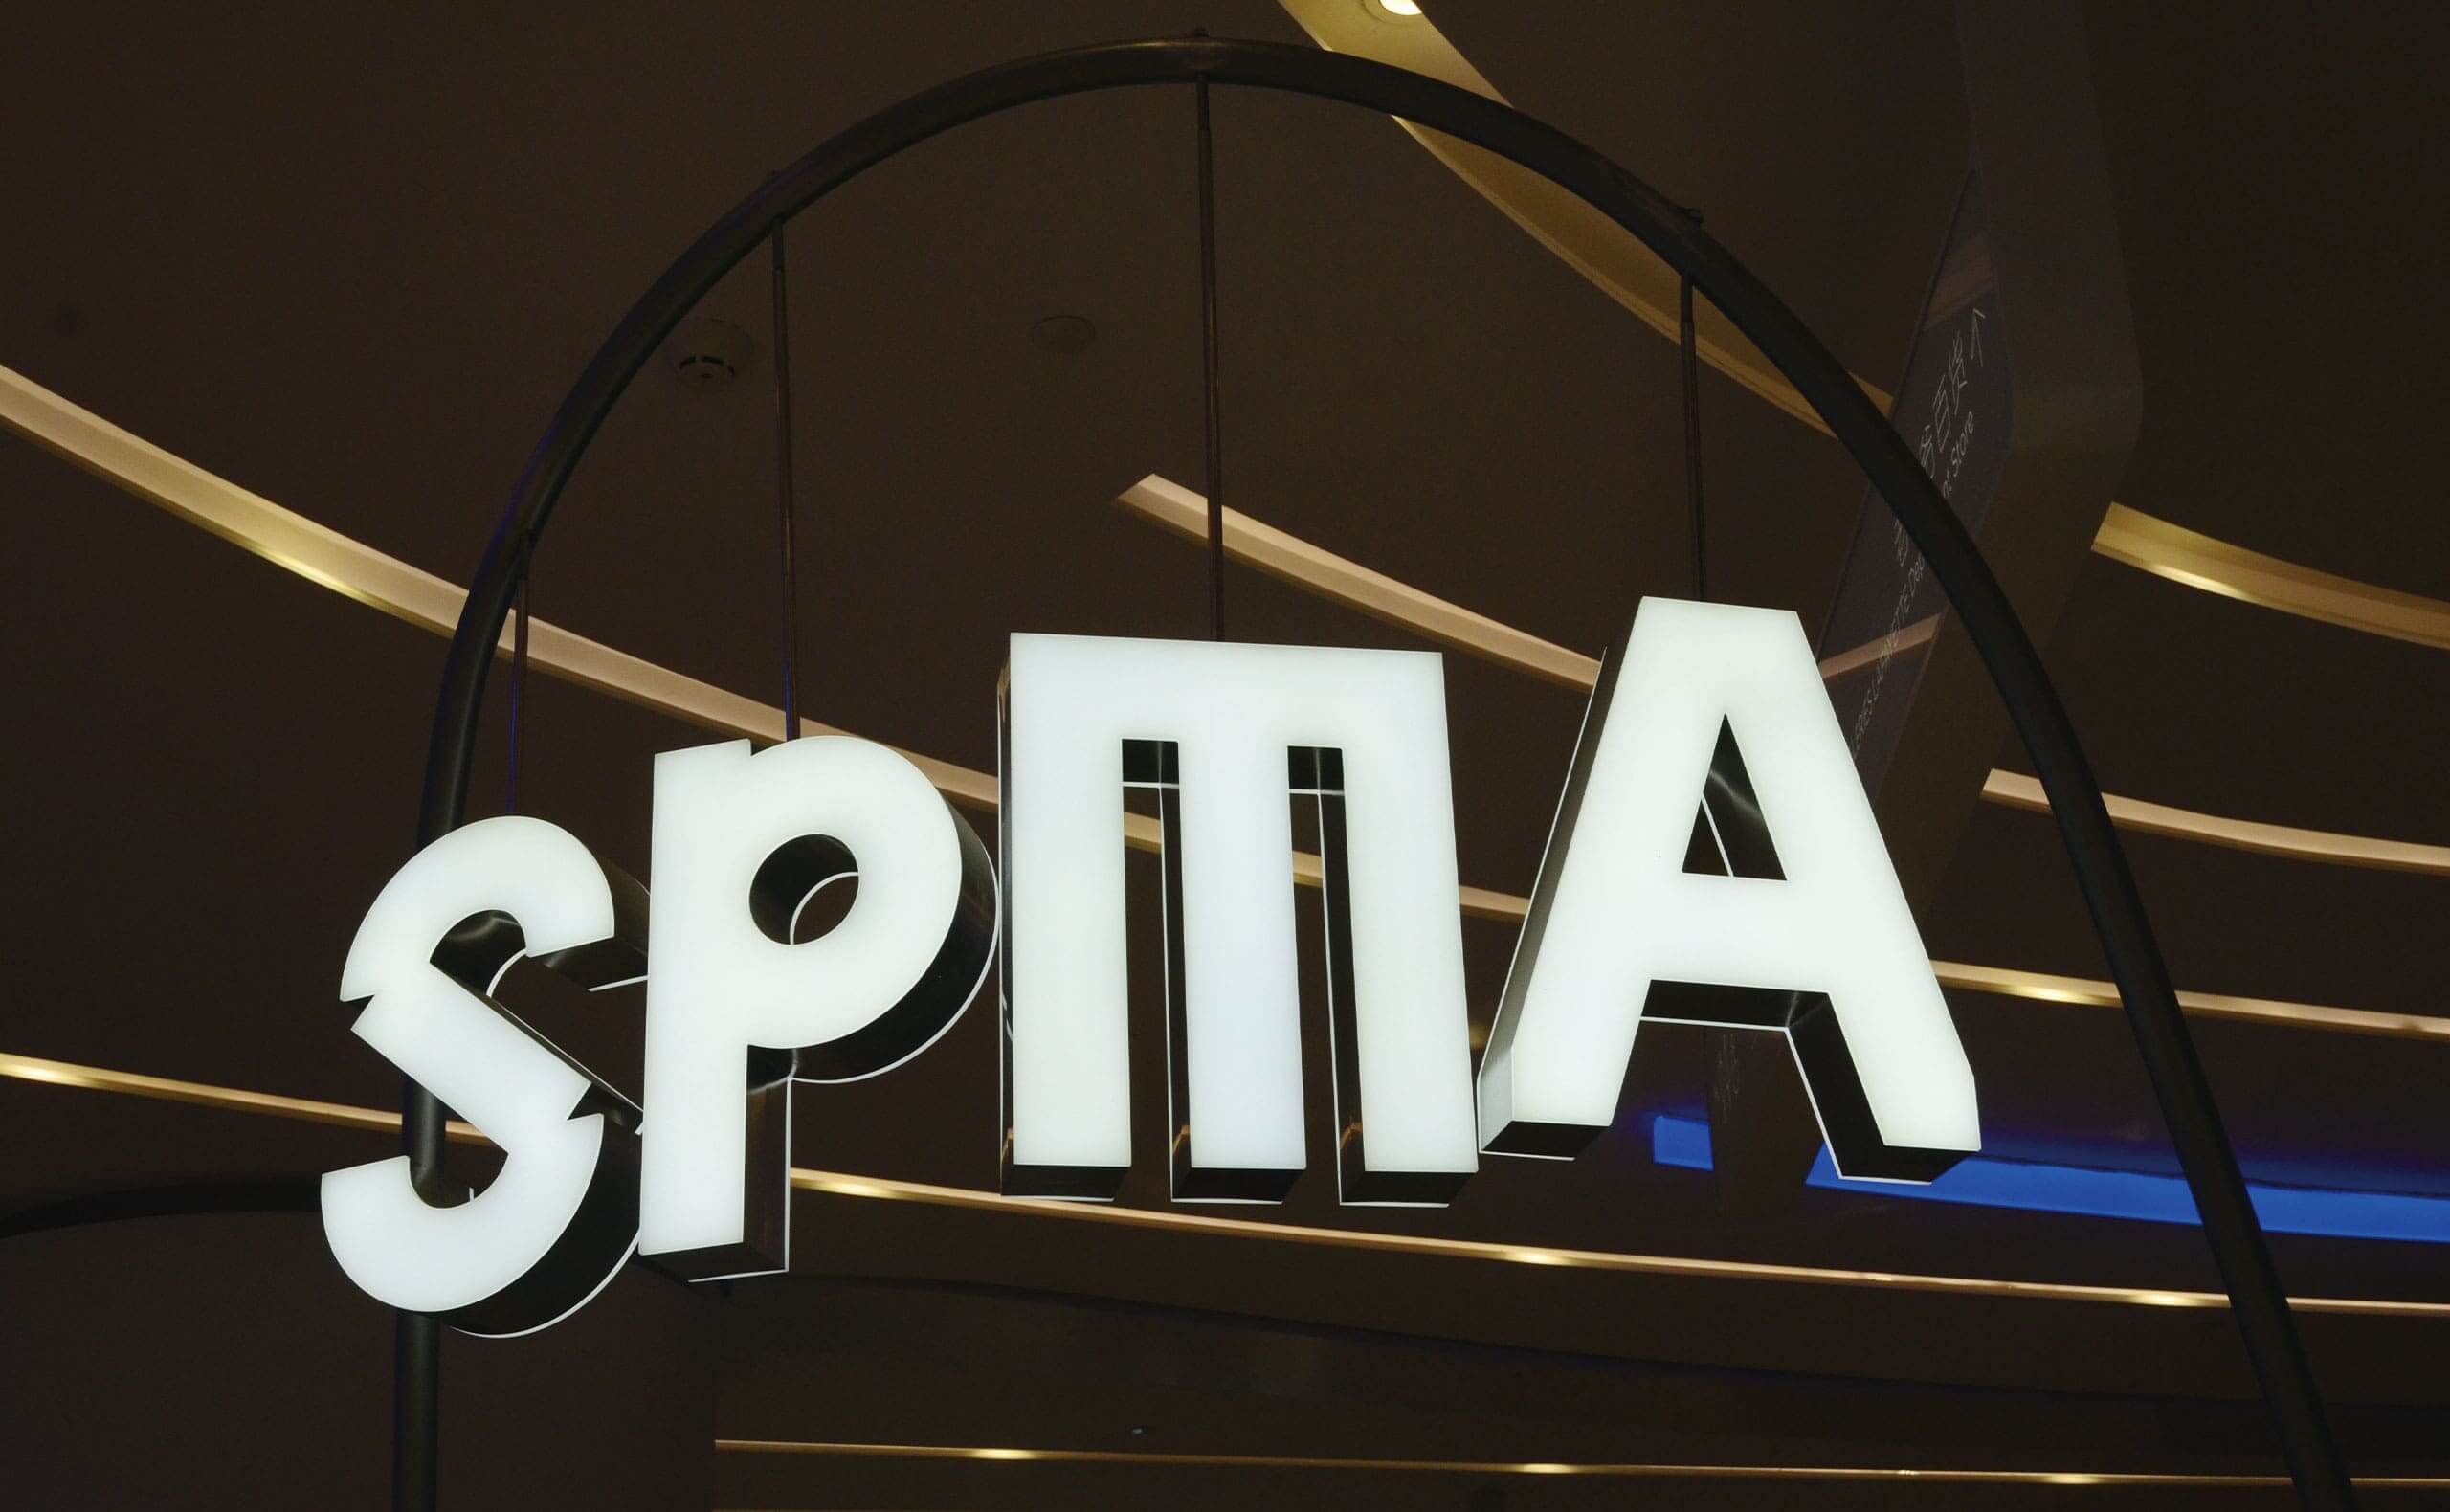 Metal Front and Backlit Channel Letters For Spma